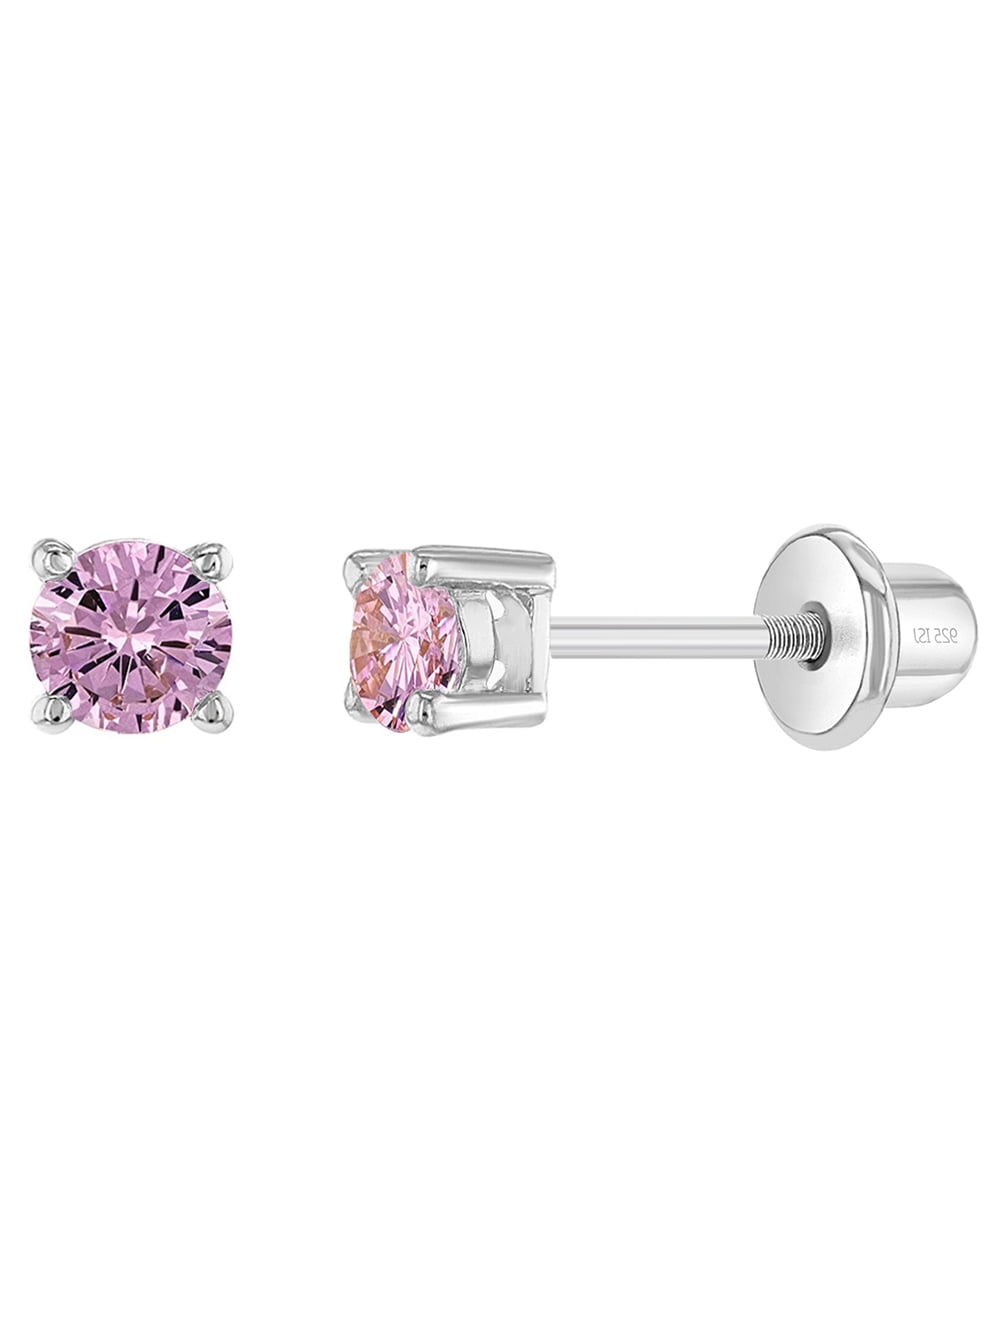  FASACCO Screw Back CZ Earrings for Girls 925 Sterling Silver  18K Hypoallergenic Earrings Gold: Clothing, Shoes & Jewelry